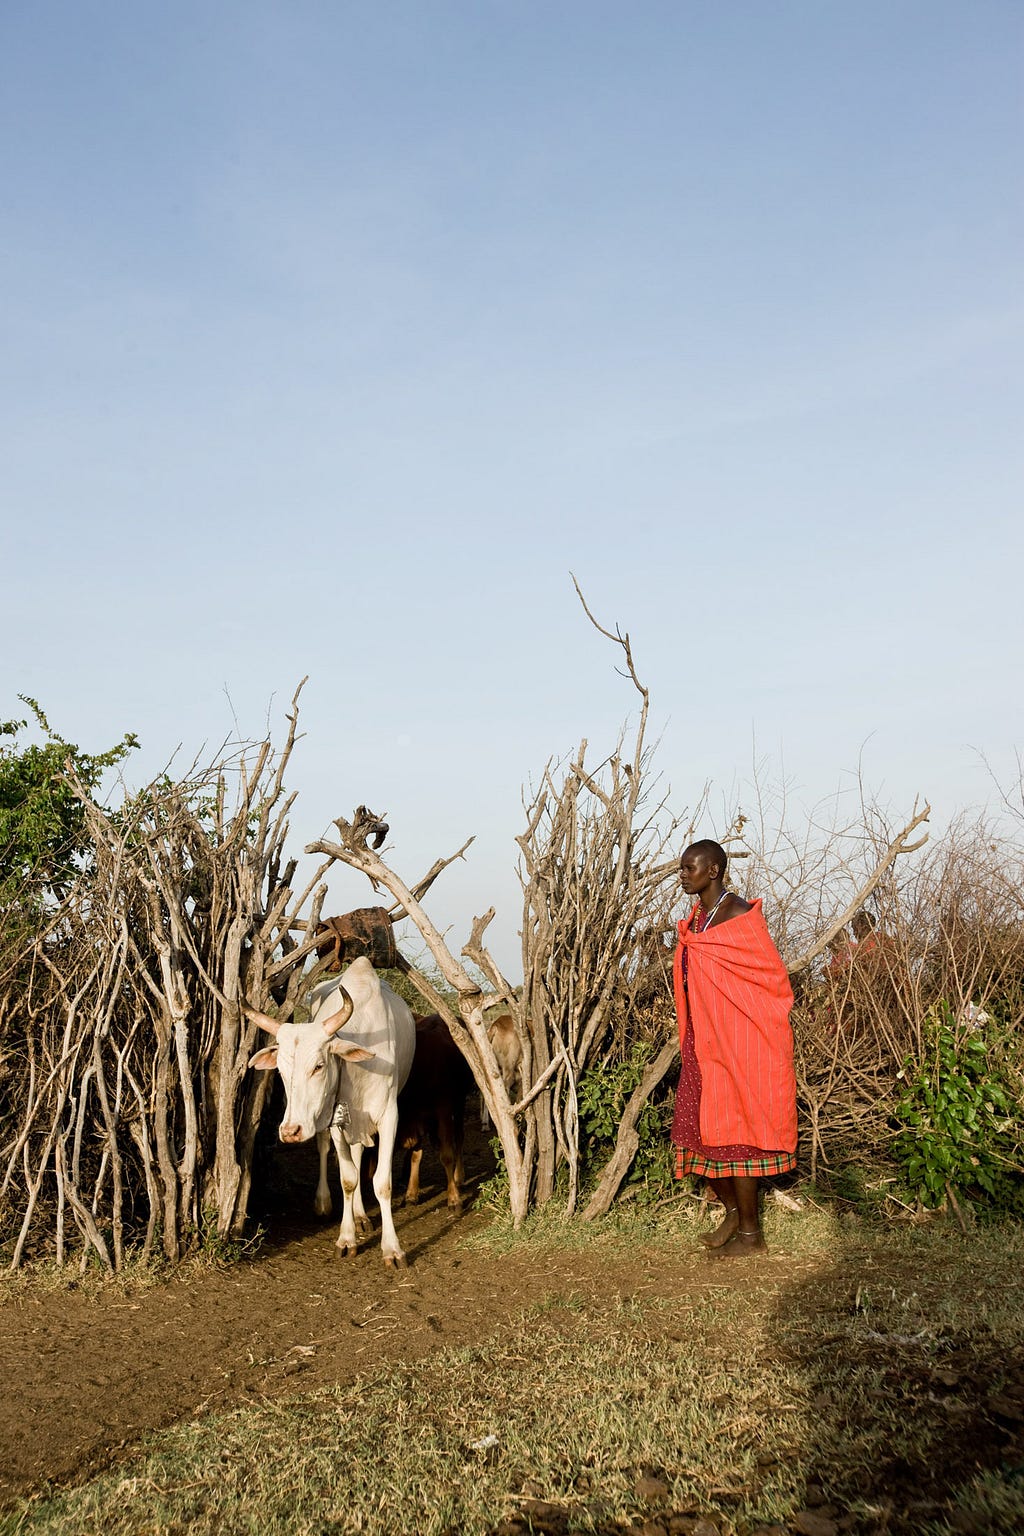 The traditional Maasai diet consists of meat, milk, and blood from their prized cattle. Livestock is kept safe from predators overnight in thorny enclosures called boma.